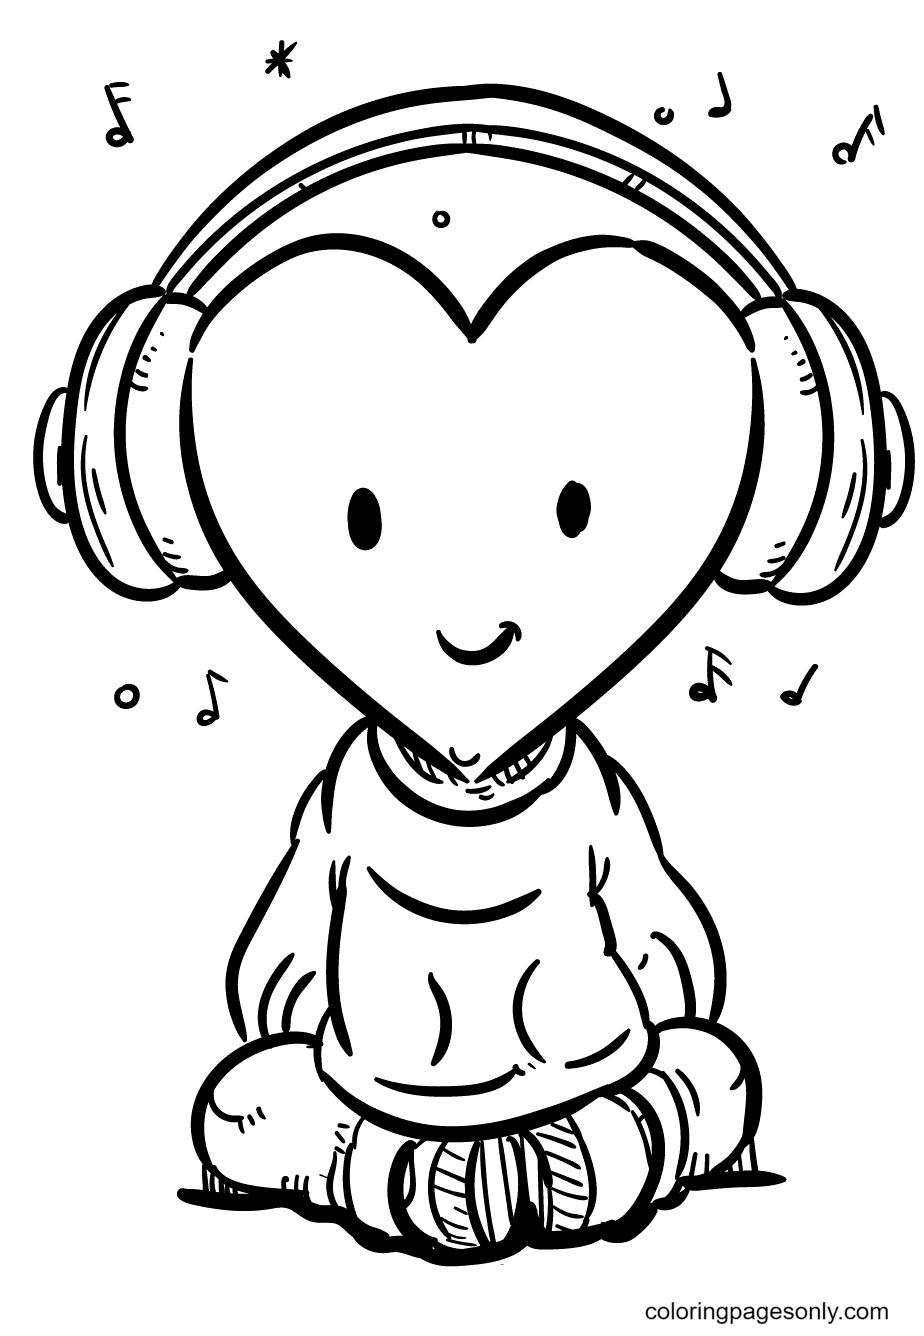 Boy with Heart Shaped Head Listening To Music Coloring Page